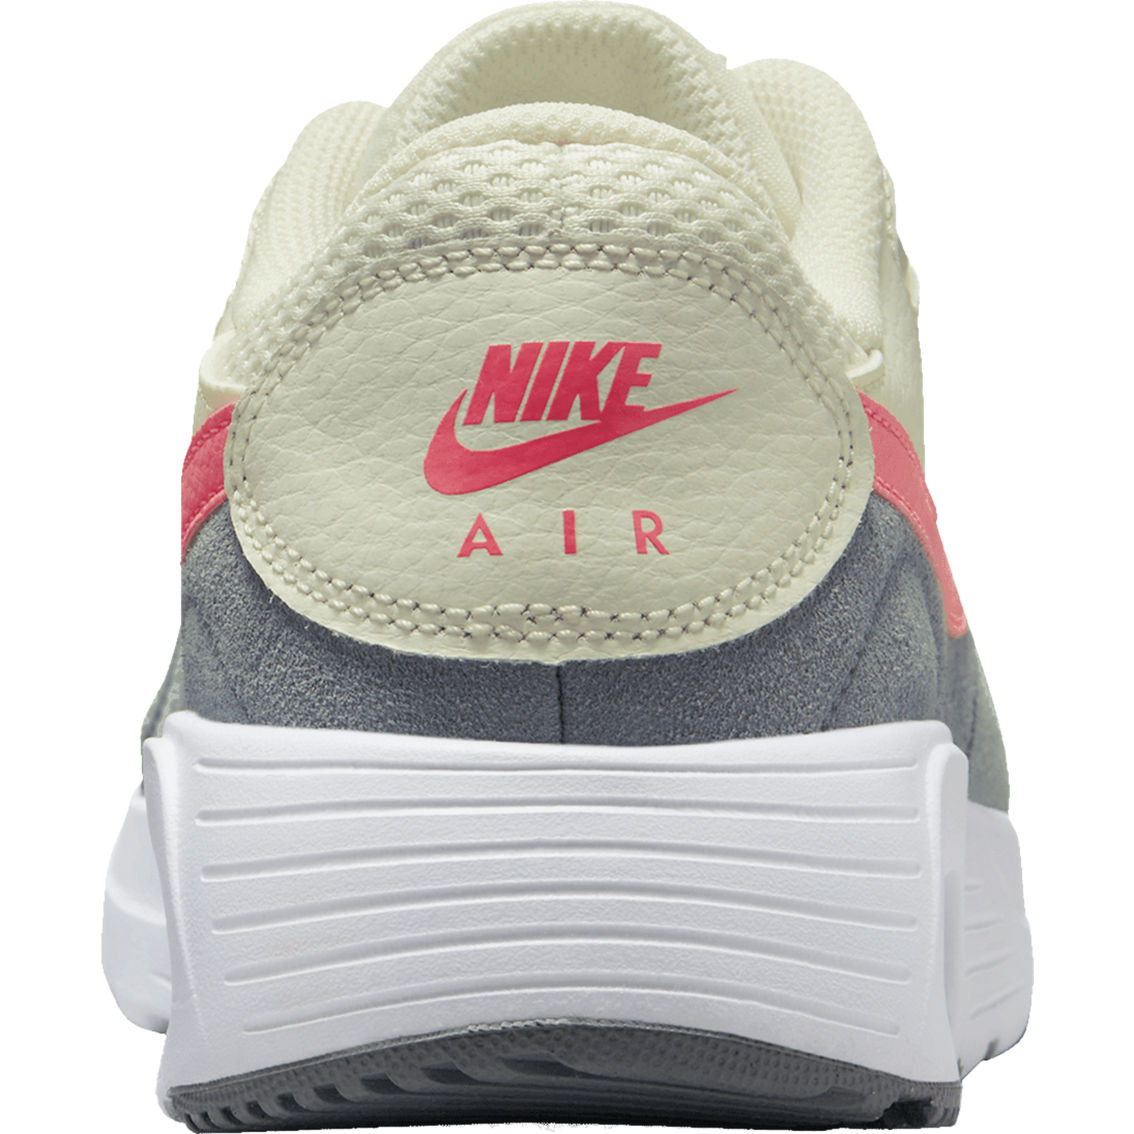 Nike Women's Air Max SC Running Shoes - Image 6 of 8